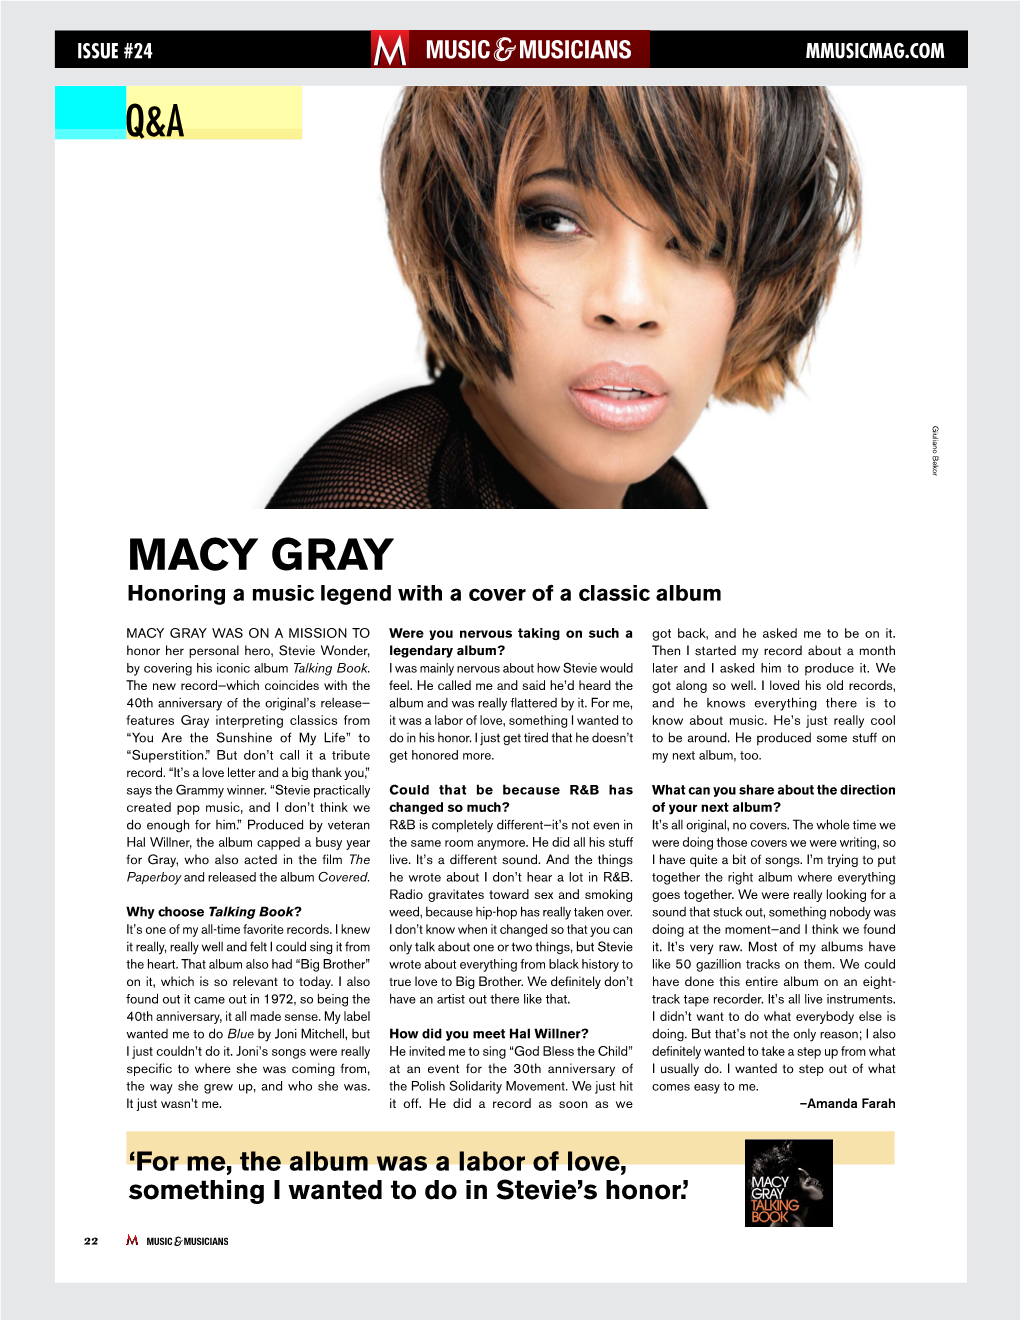 Macy Gray Honoring a Music Legend with a Cover of a Classic Album